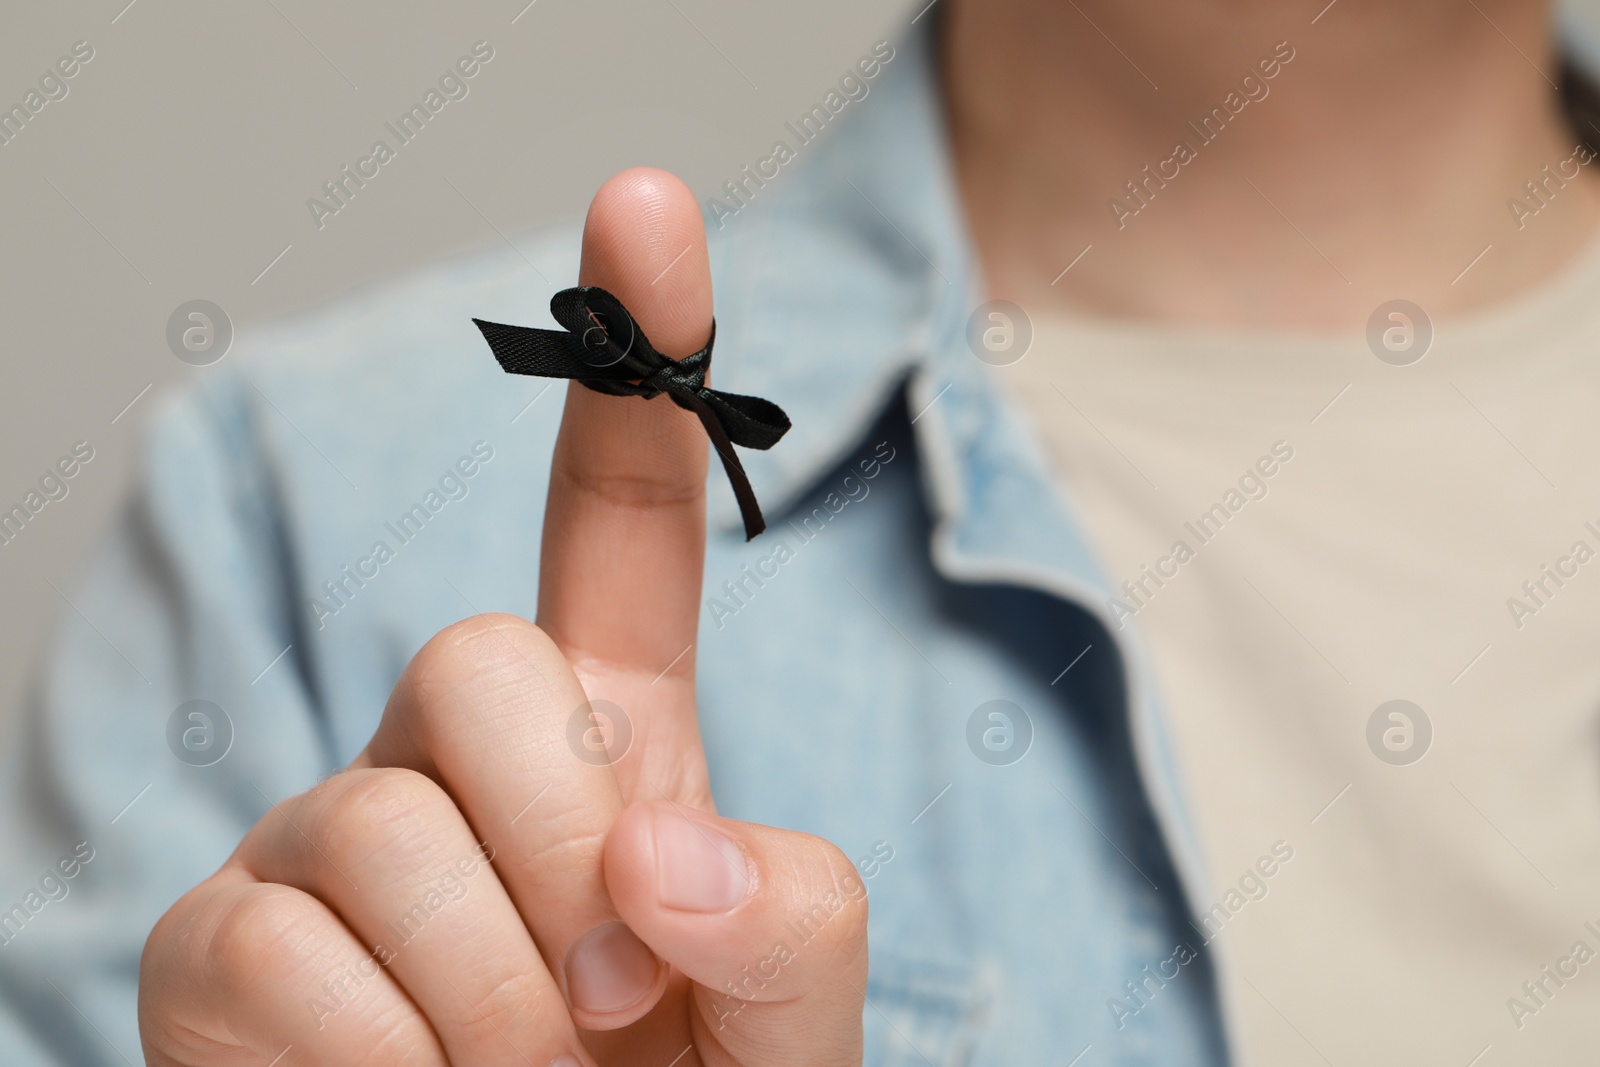 Photo of Man showing index finger with tied bow as reminder against light grey background, focus on hand